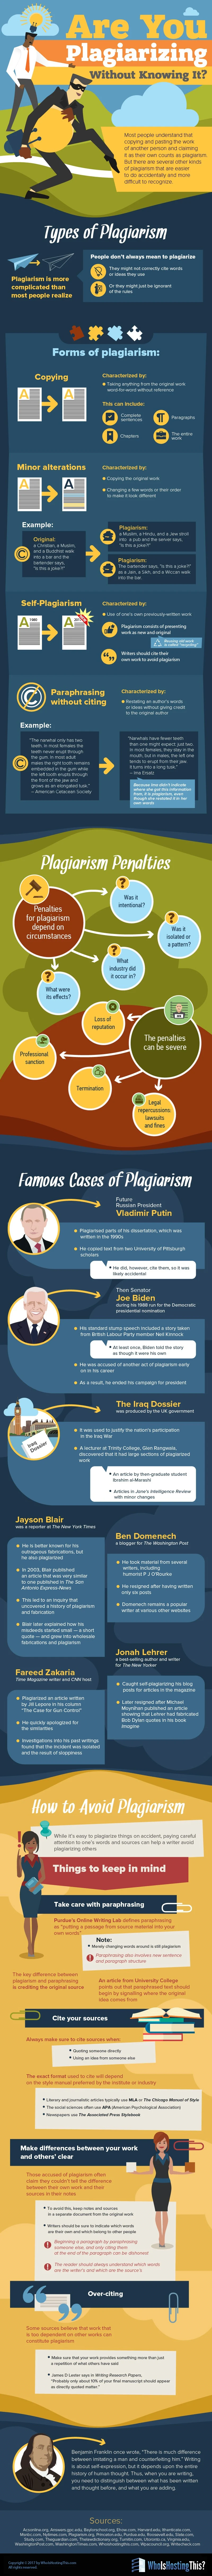 Are You Plagiarizing Without Knowing It? #infographic